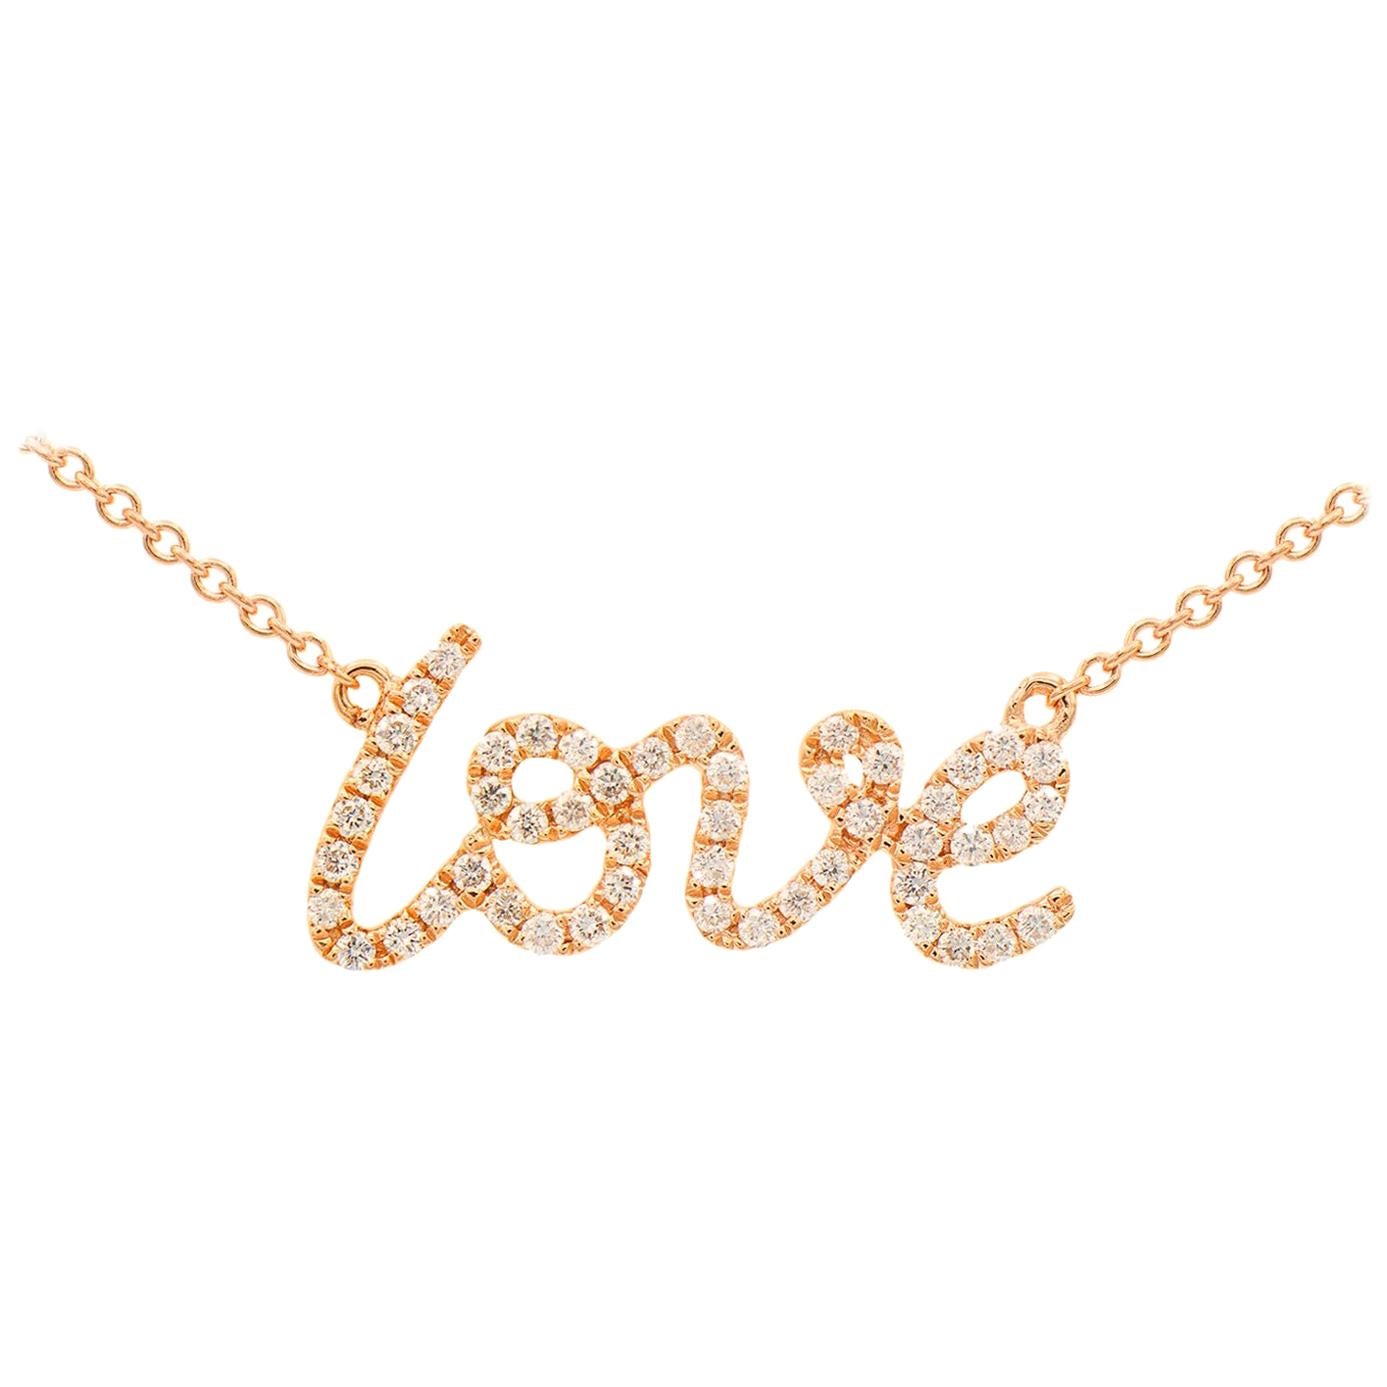 Rose Gold "Love" Necklace